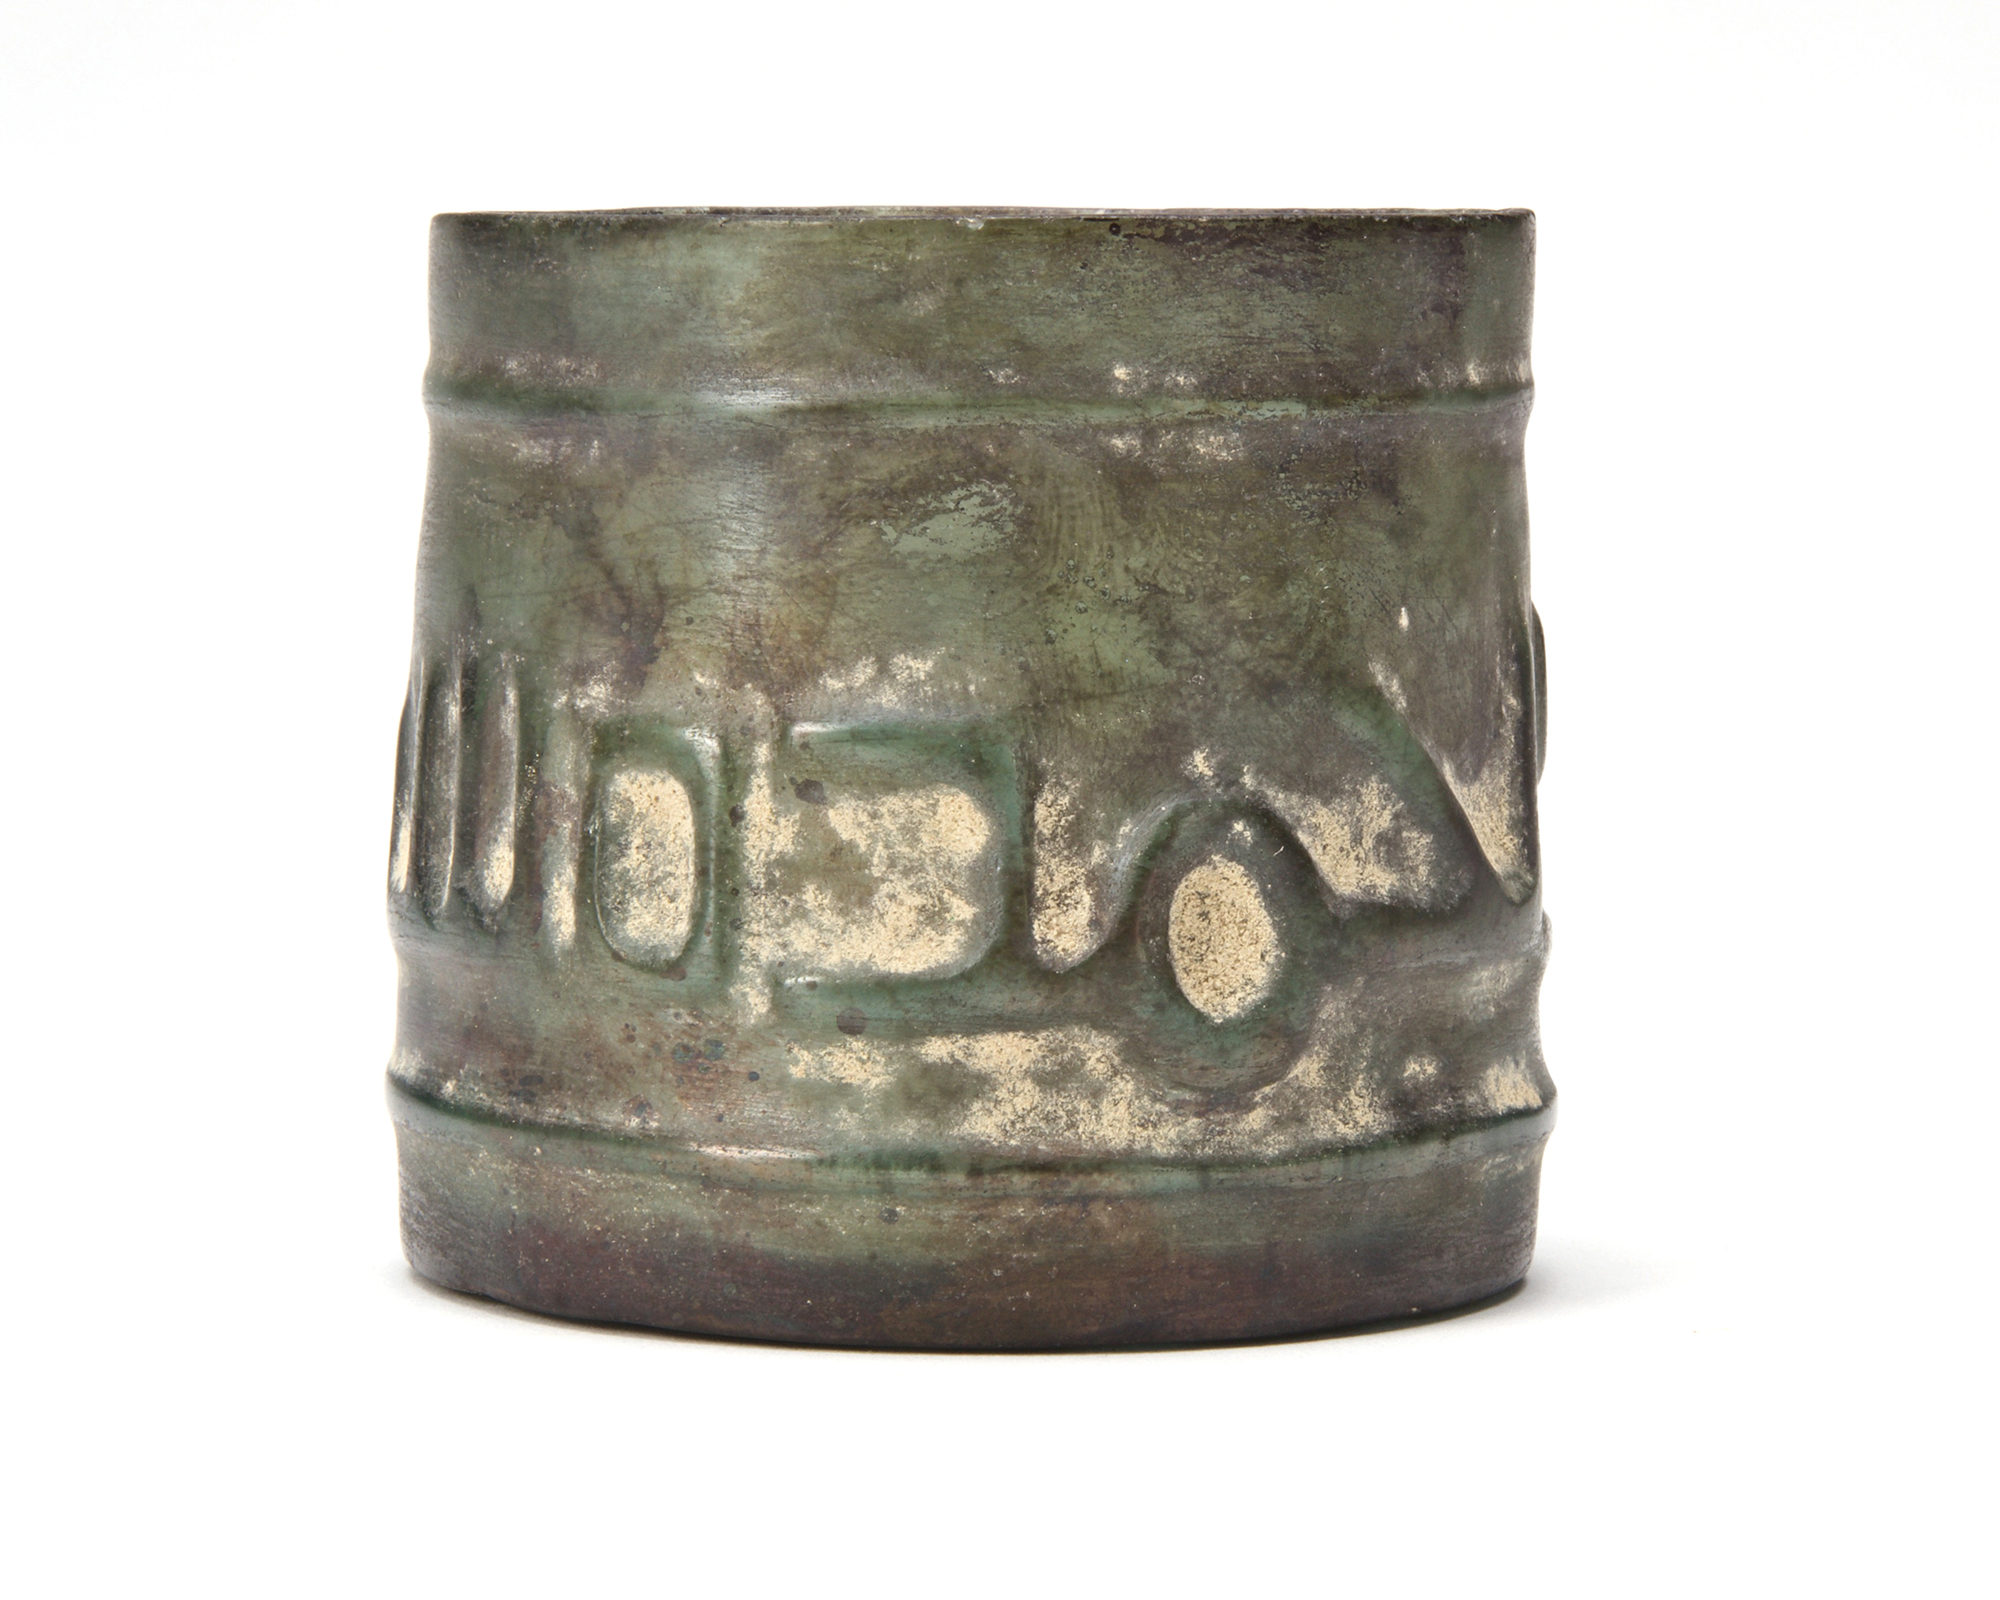 A GLASS BEAKER, SYRIA, 10TH-11TH CENTURY - Image 8 of 14